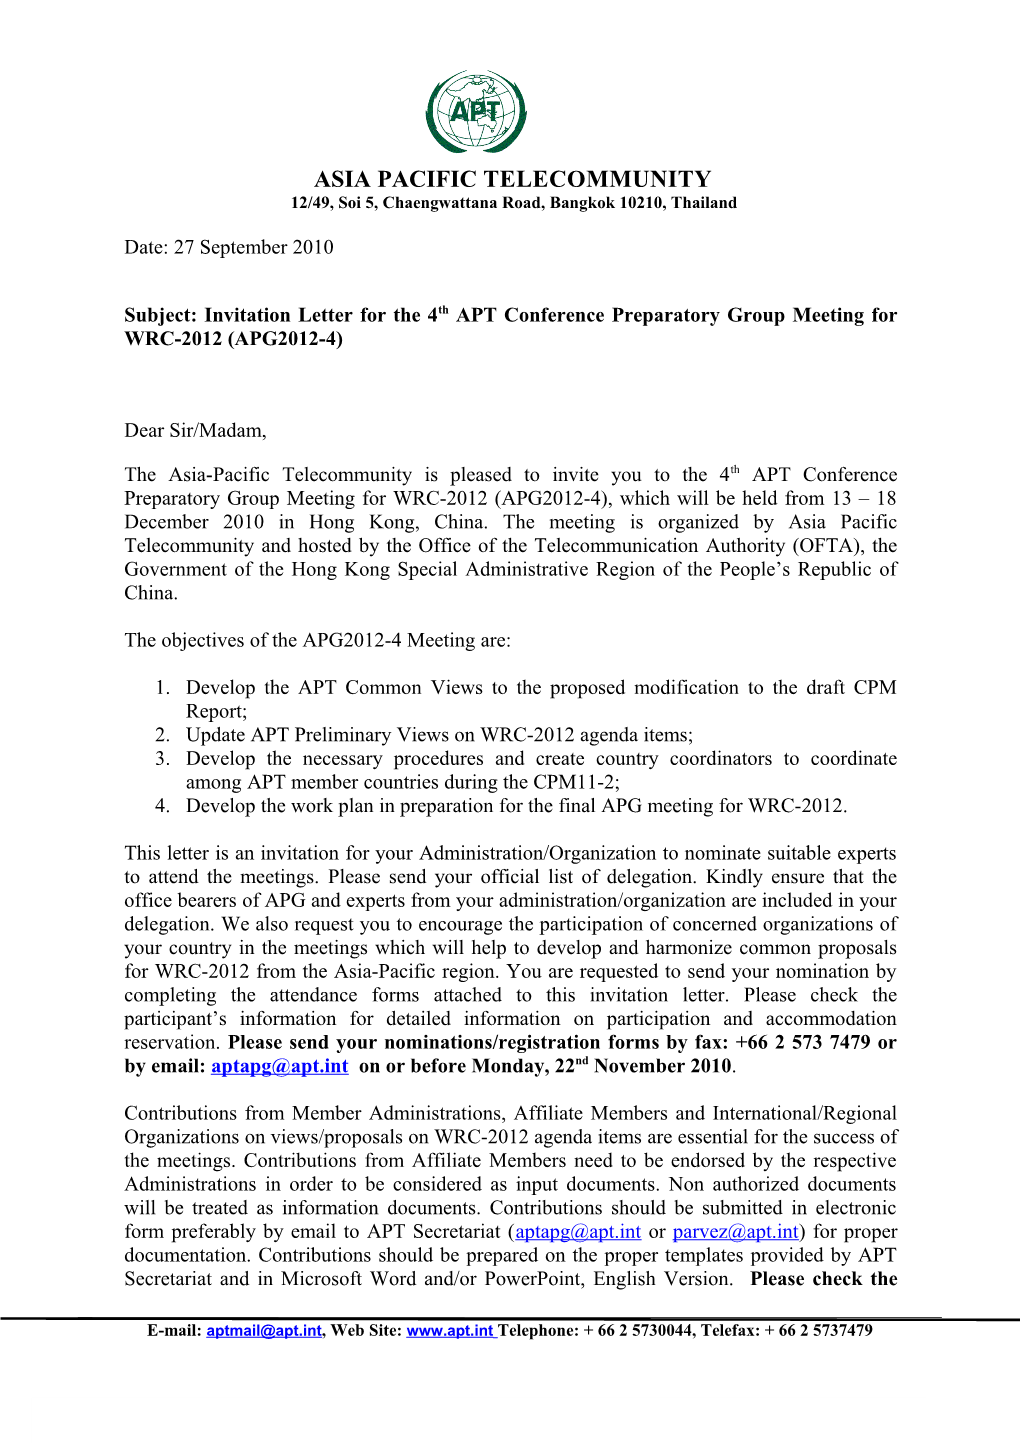 Subject: Invitation Letter for the 4Th APT Conference Preparatory Group Meeting for WRC-2012